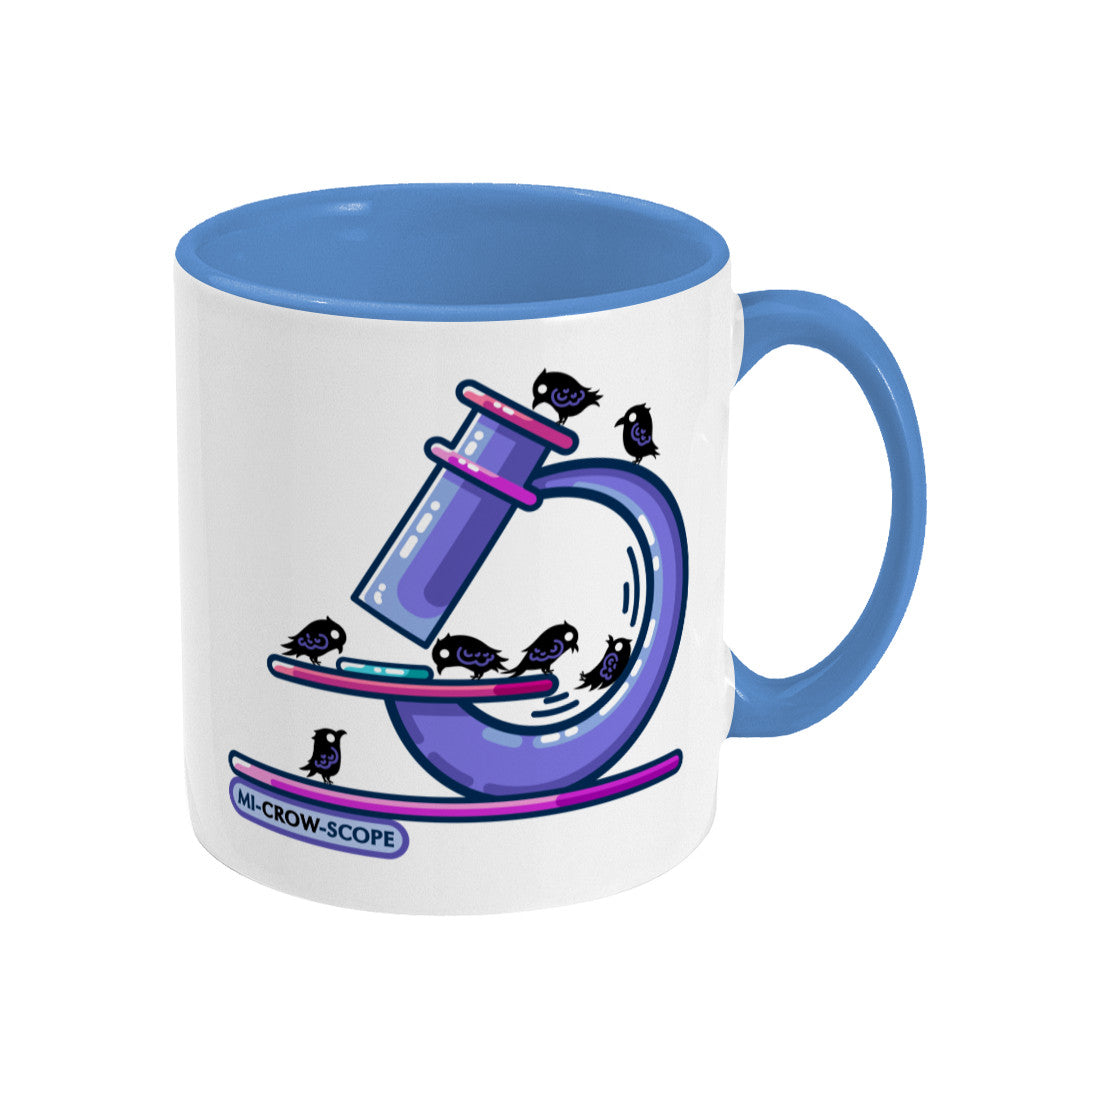 A two-toned white and blue ceramic mug, handle to the right, with a design of a purple microscope with crows standing on it.